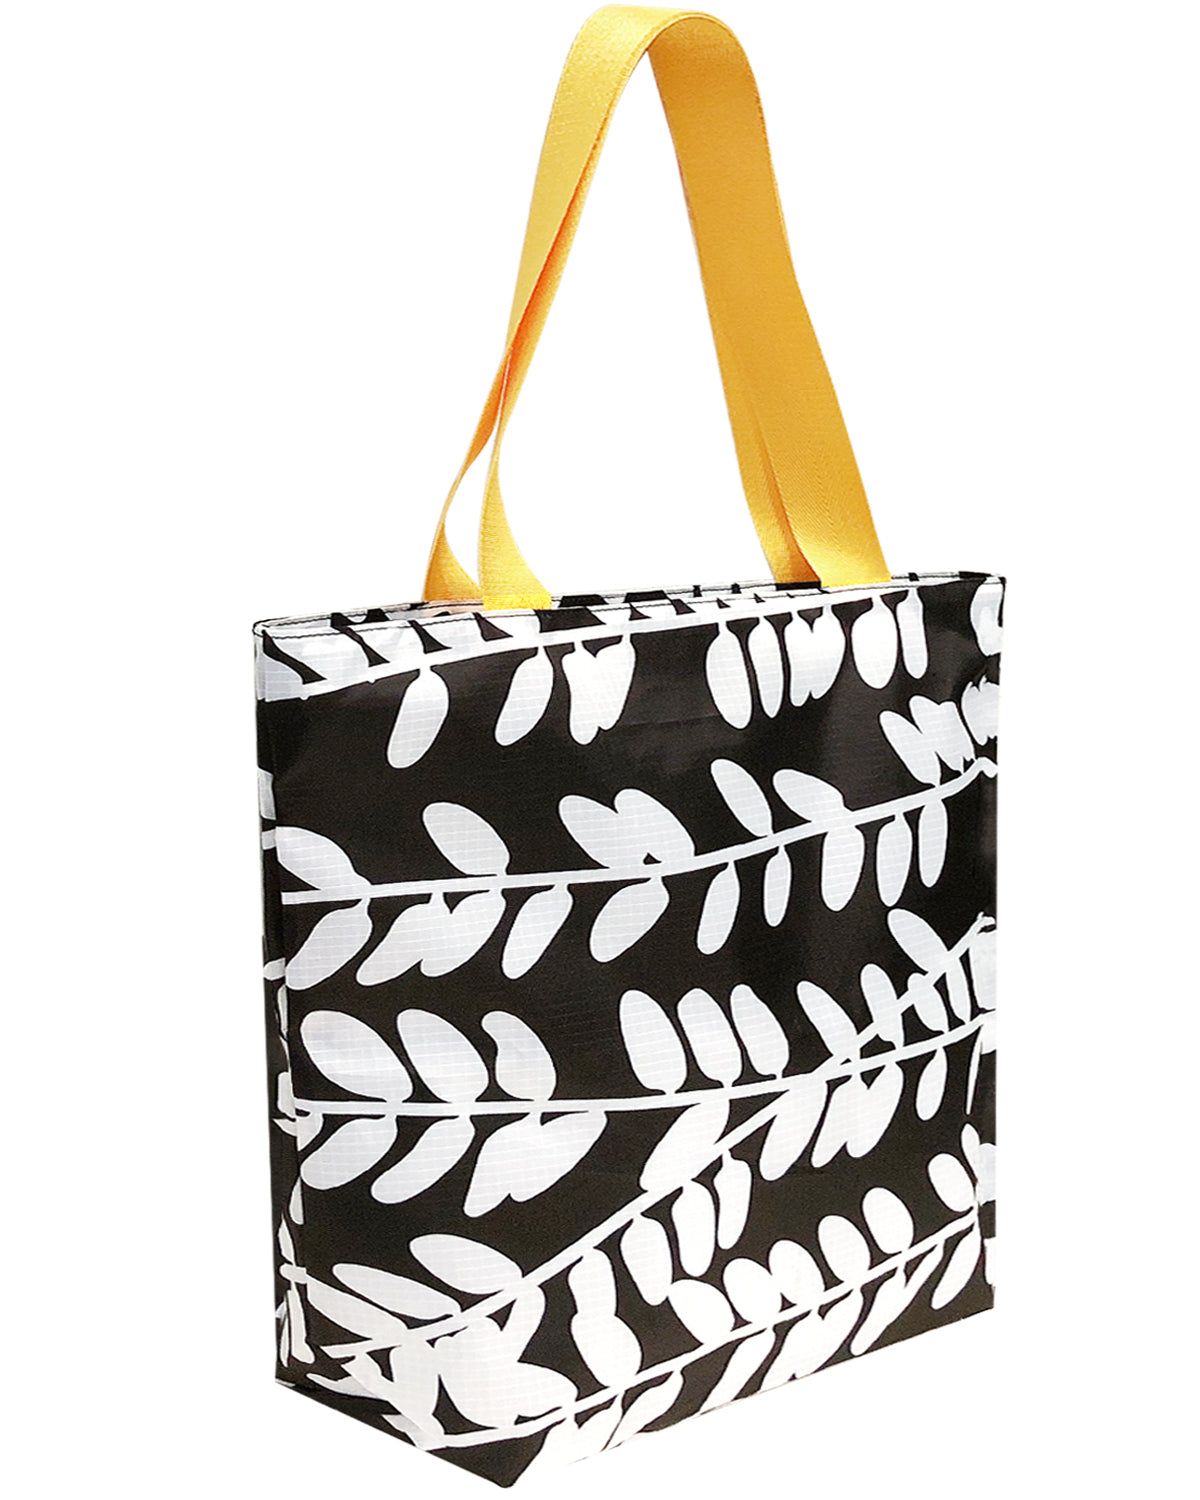 Wrapables Carryall Shopping Travel Tote Bag with Durable Ripstop Polyester - Foldable, Waterproof, and OEKO-TEX Certified